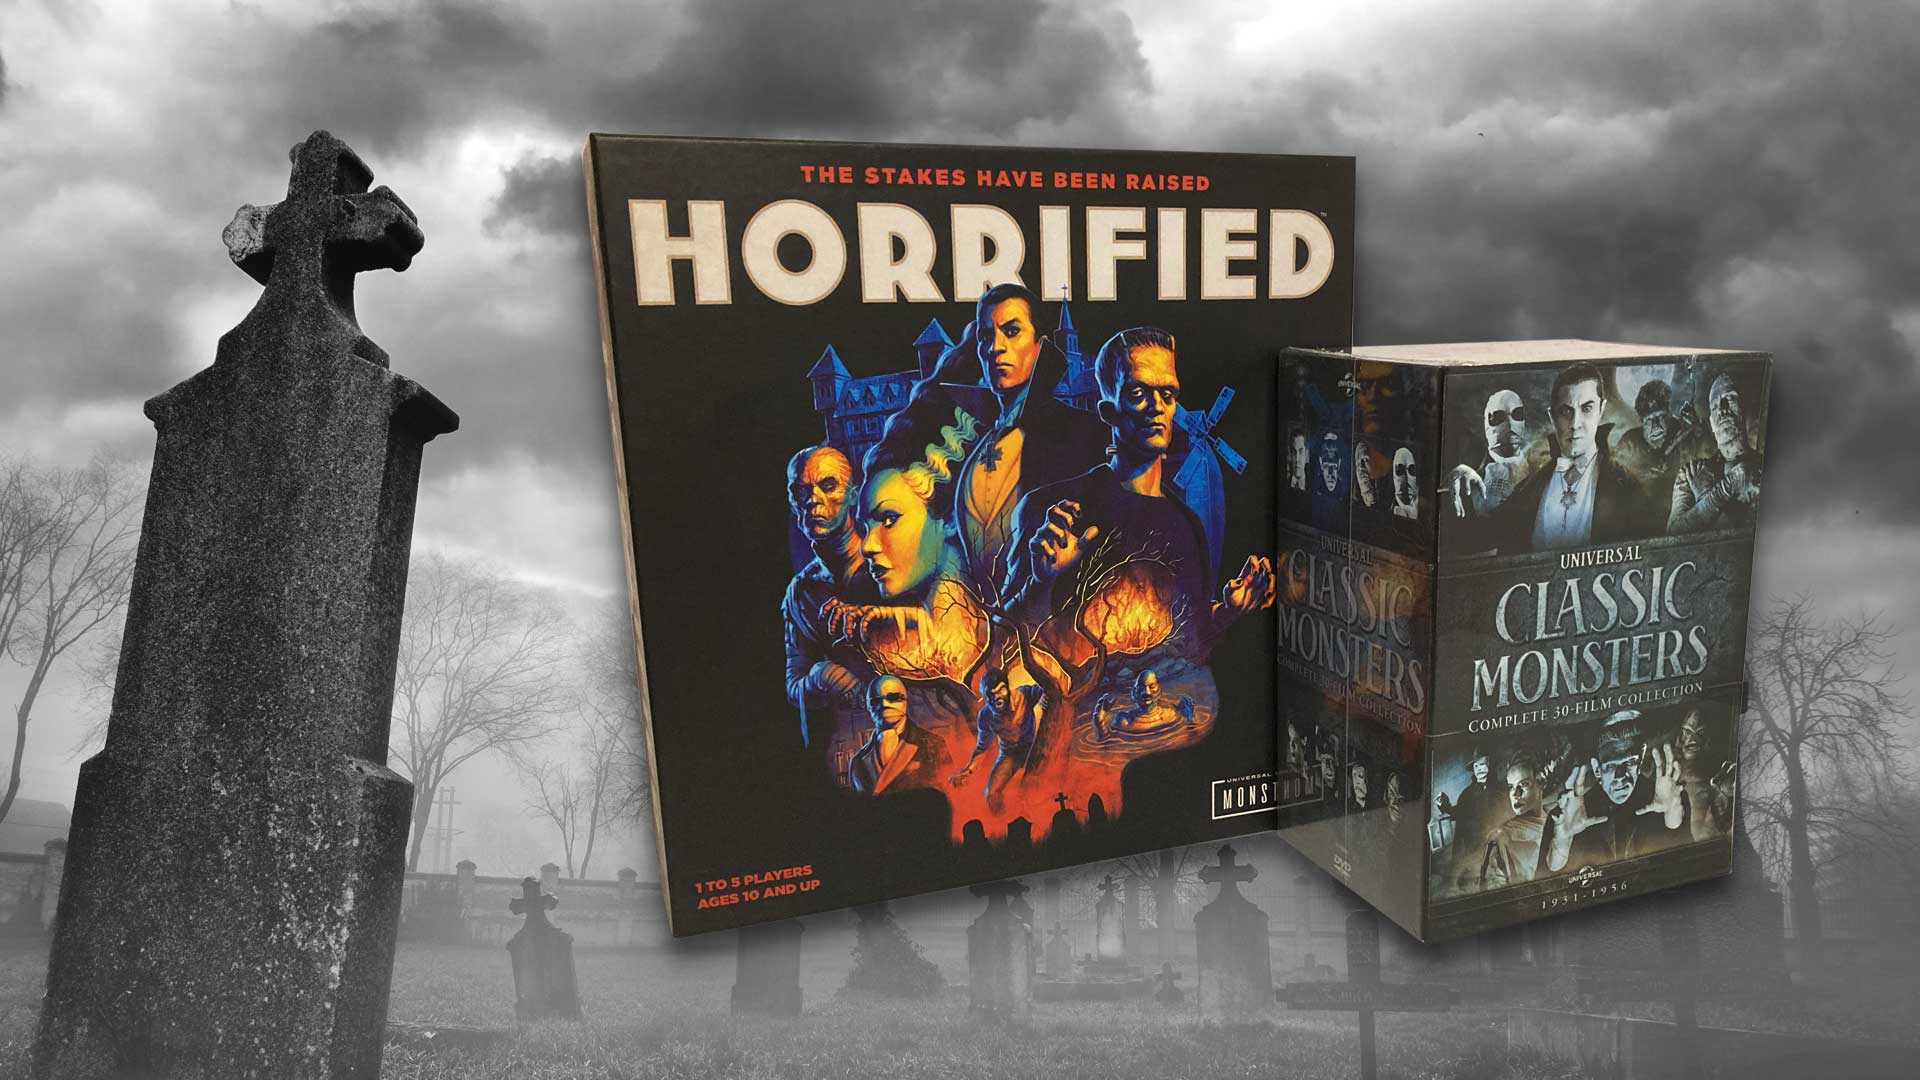 Horrified game box featuring Universal Monsters and a DVD box set of Universal Classic Monsters in front of black and white graveyard